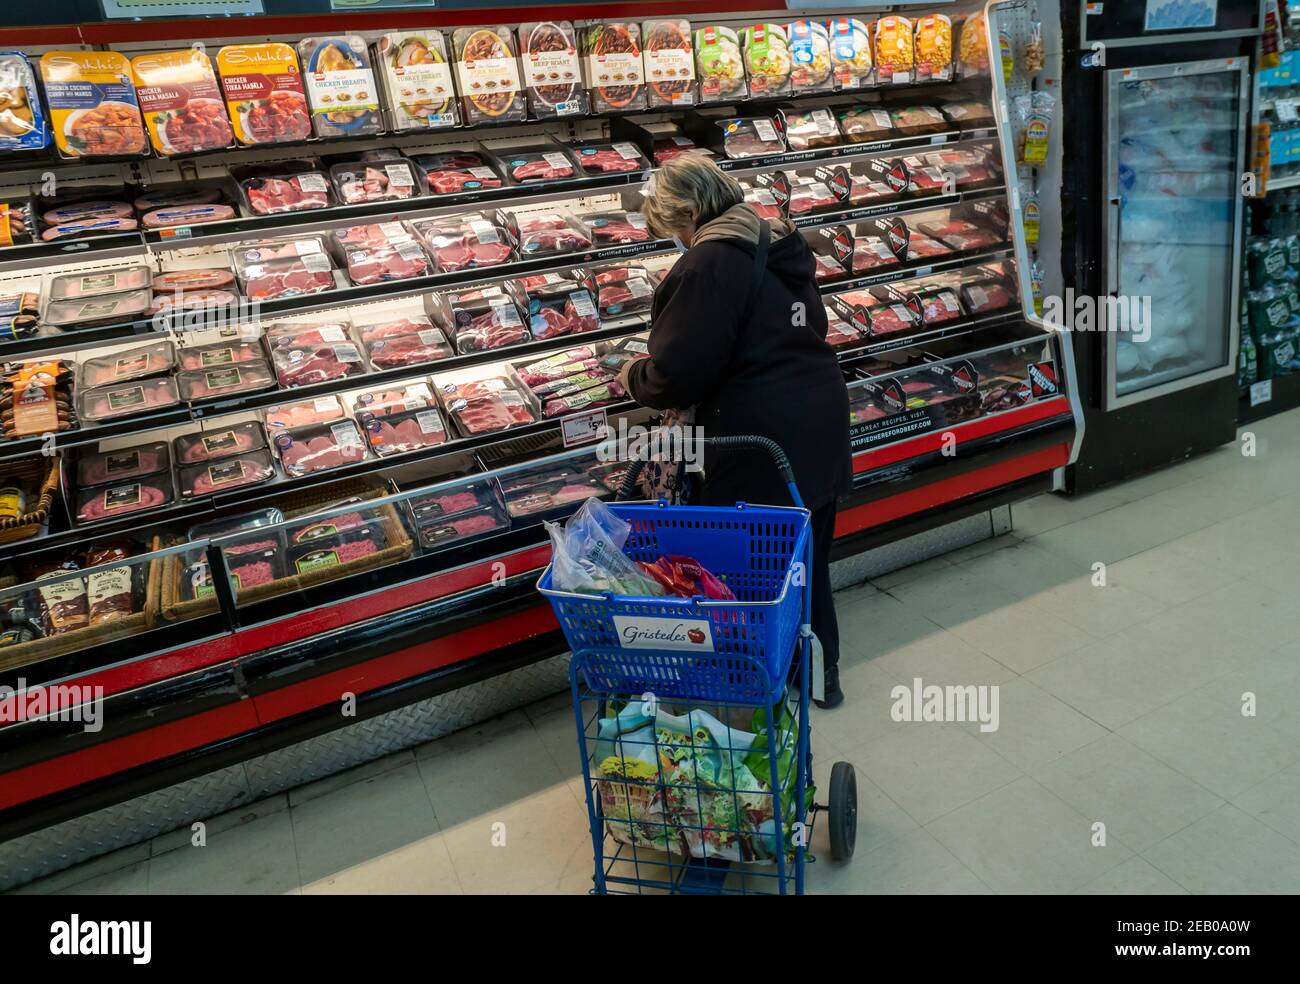 Senior citizen in the butcher department of a supermarket in New York on Tuesday, January 19, 2021. (© Richard B. Levine) Stock Photo